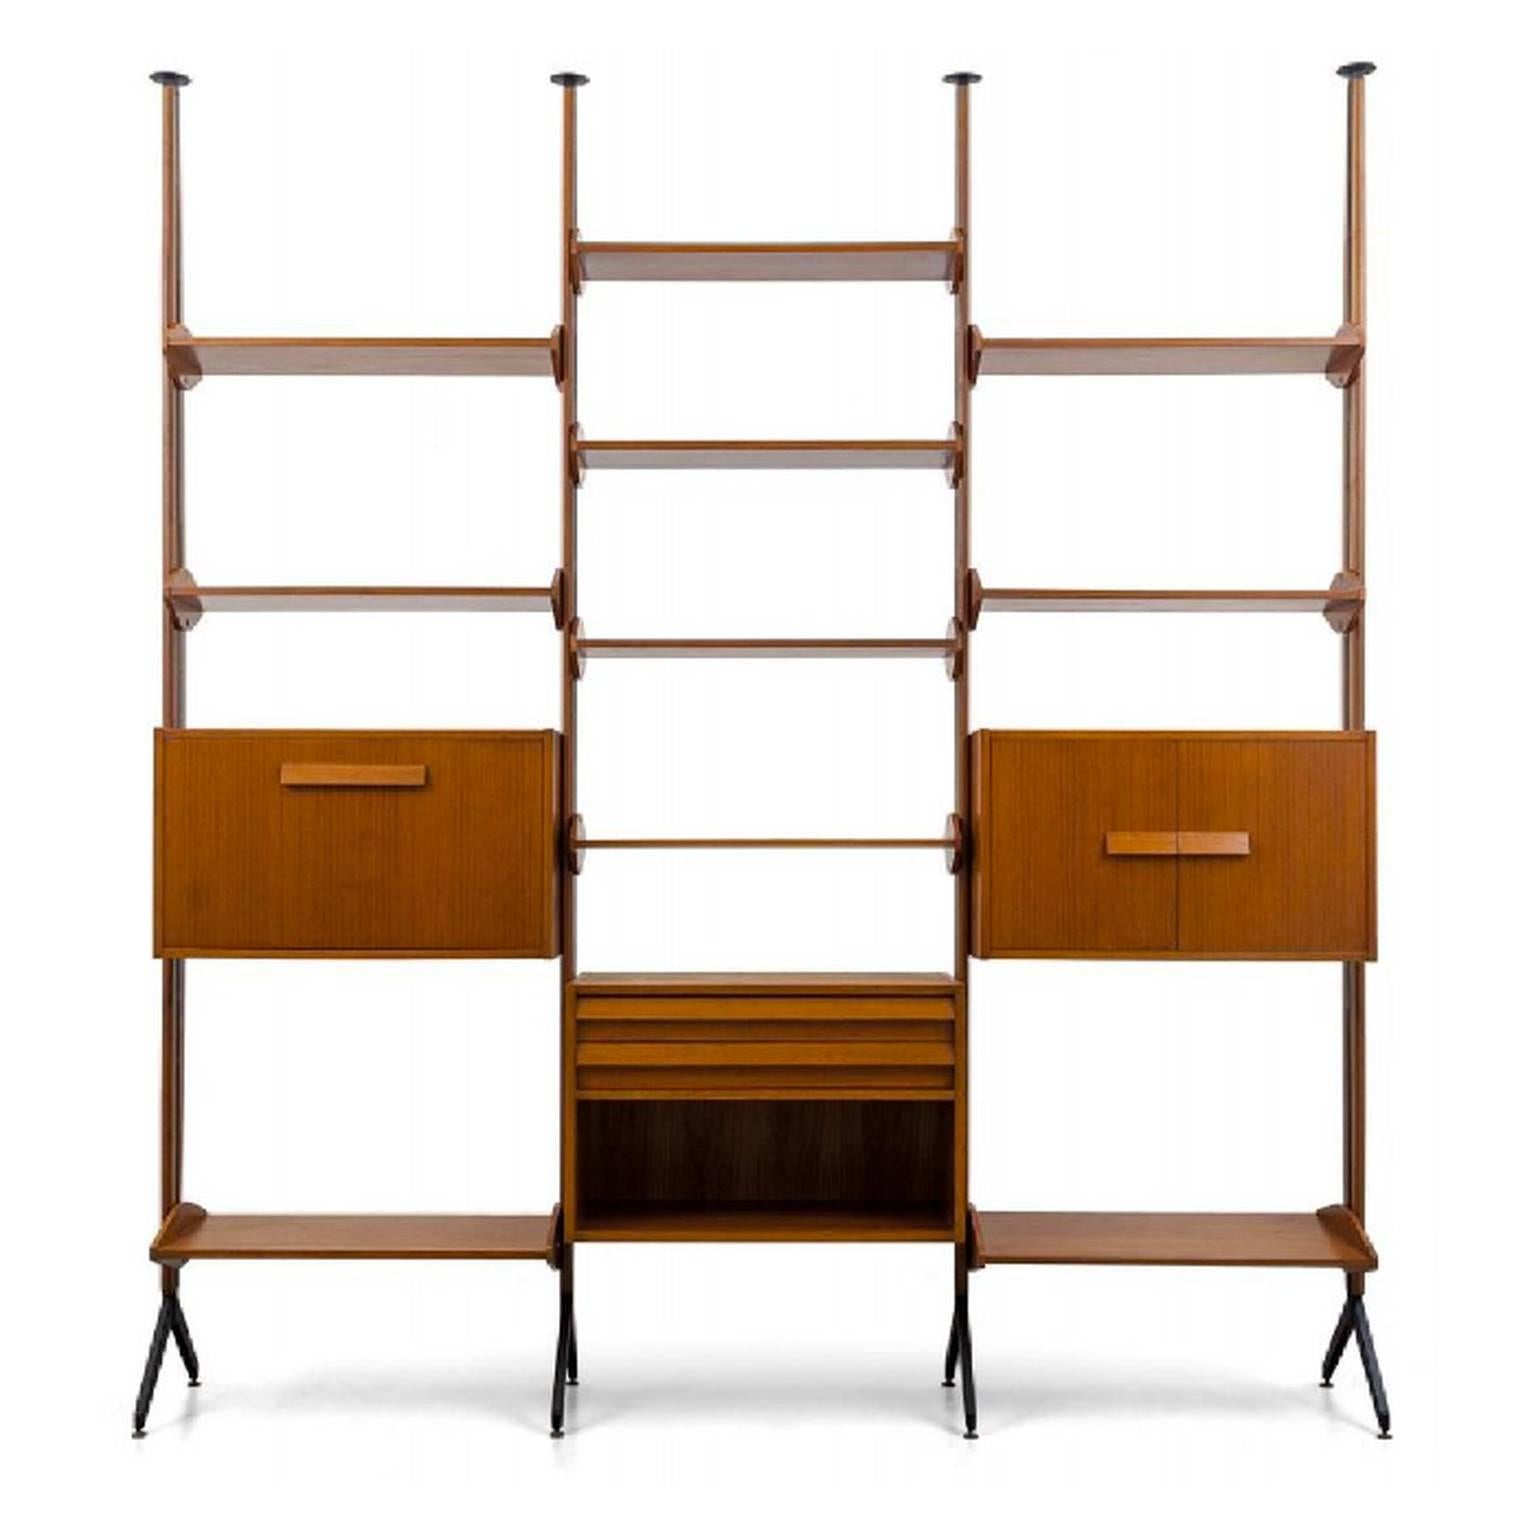 An architectural shelving system or room divider in teak and lacquered metal.  Italy 1960s.

The shelving comprises four uprights - which can be configured as two single bays, a double or triple - together with three cabinets and ten shelves.  The